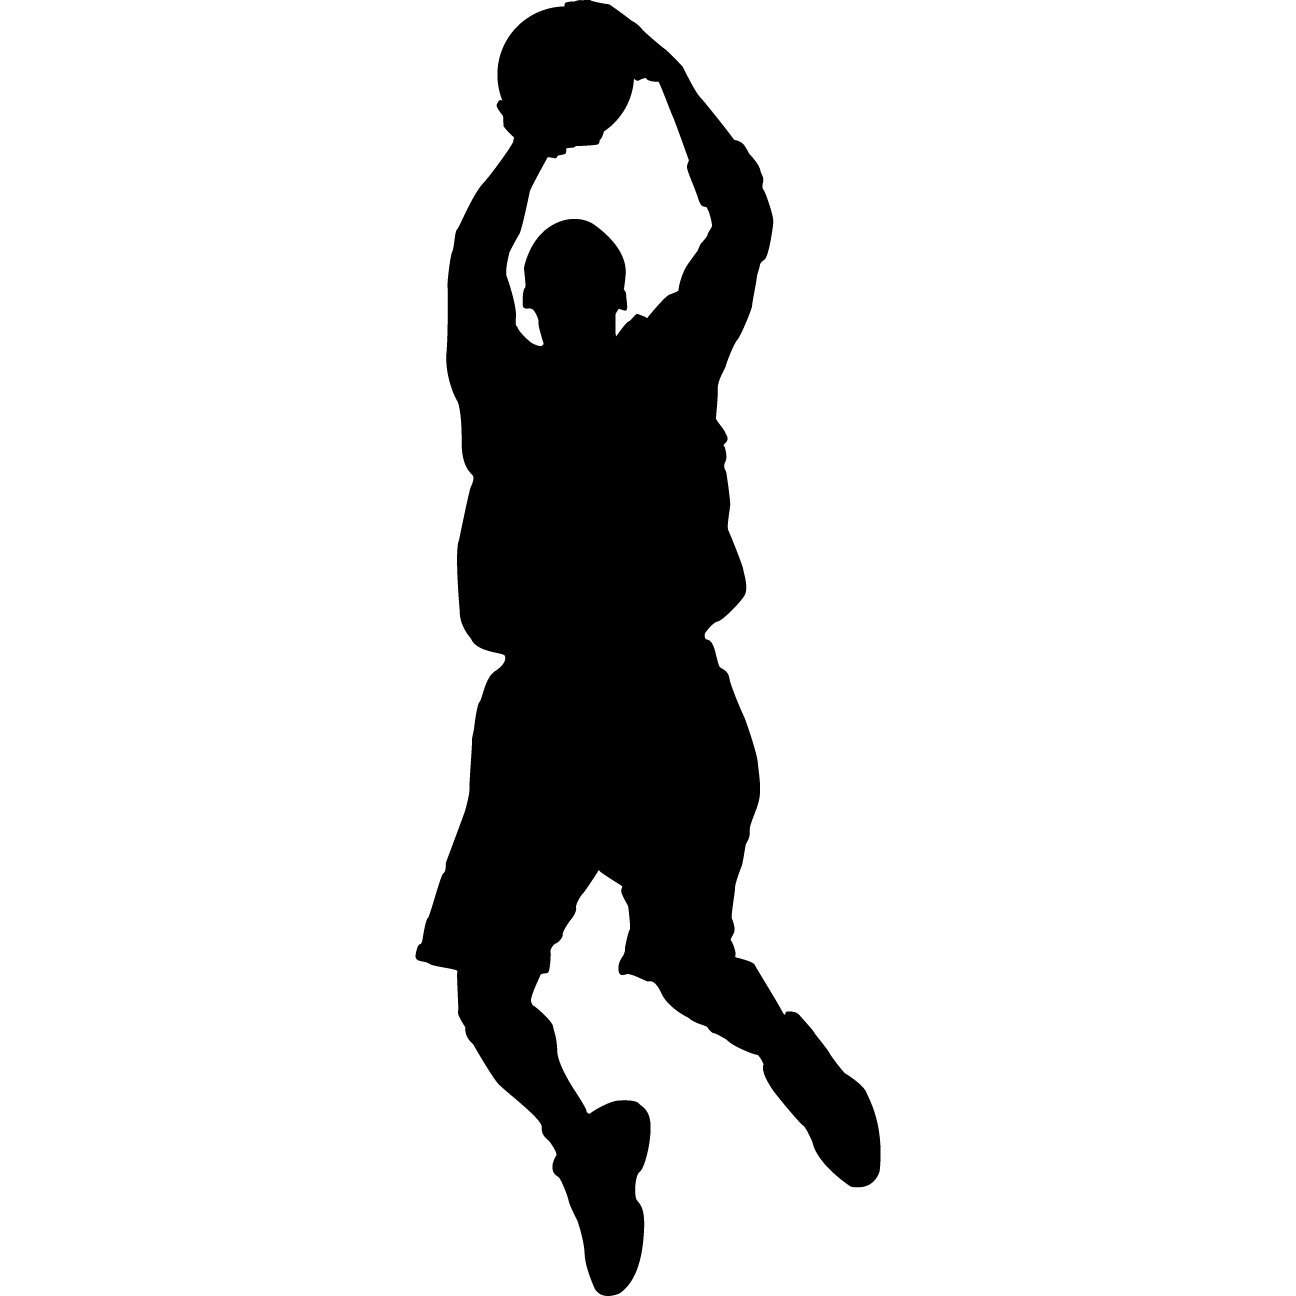 Basketball Silhouette Png - ClipArt Best